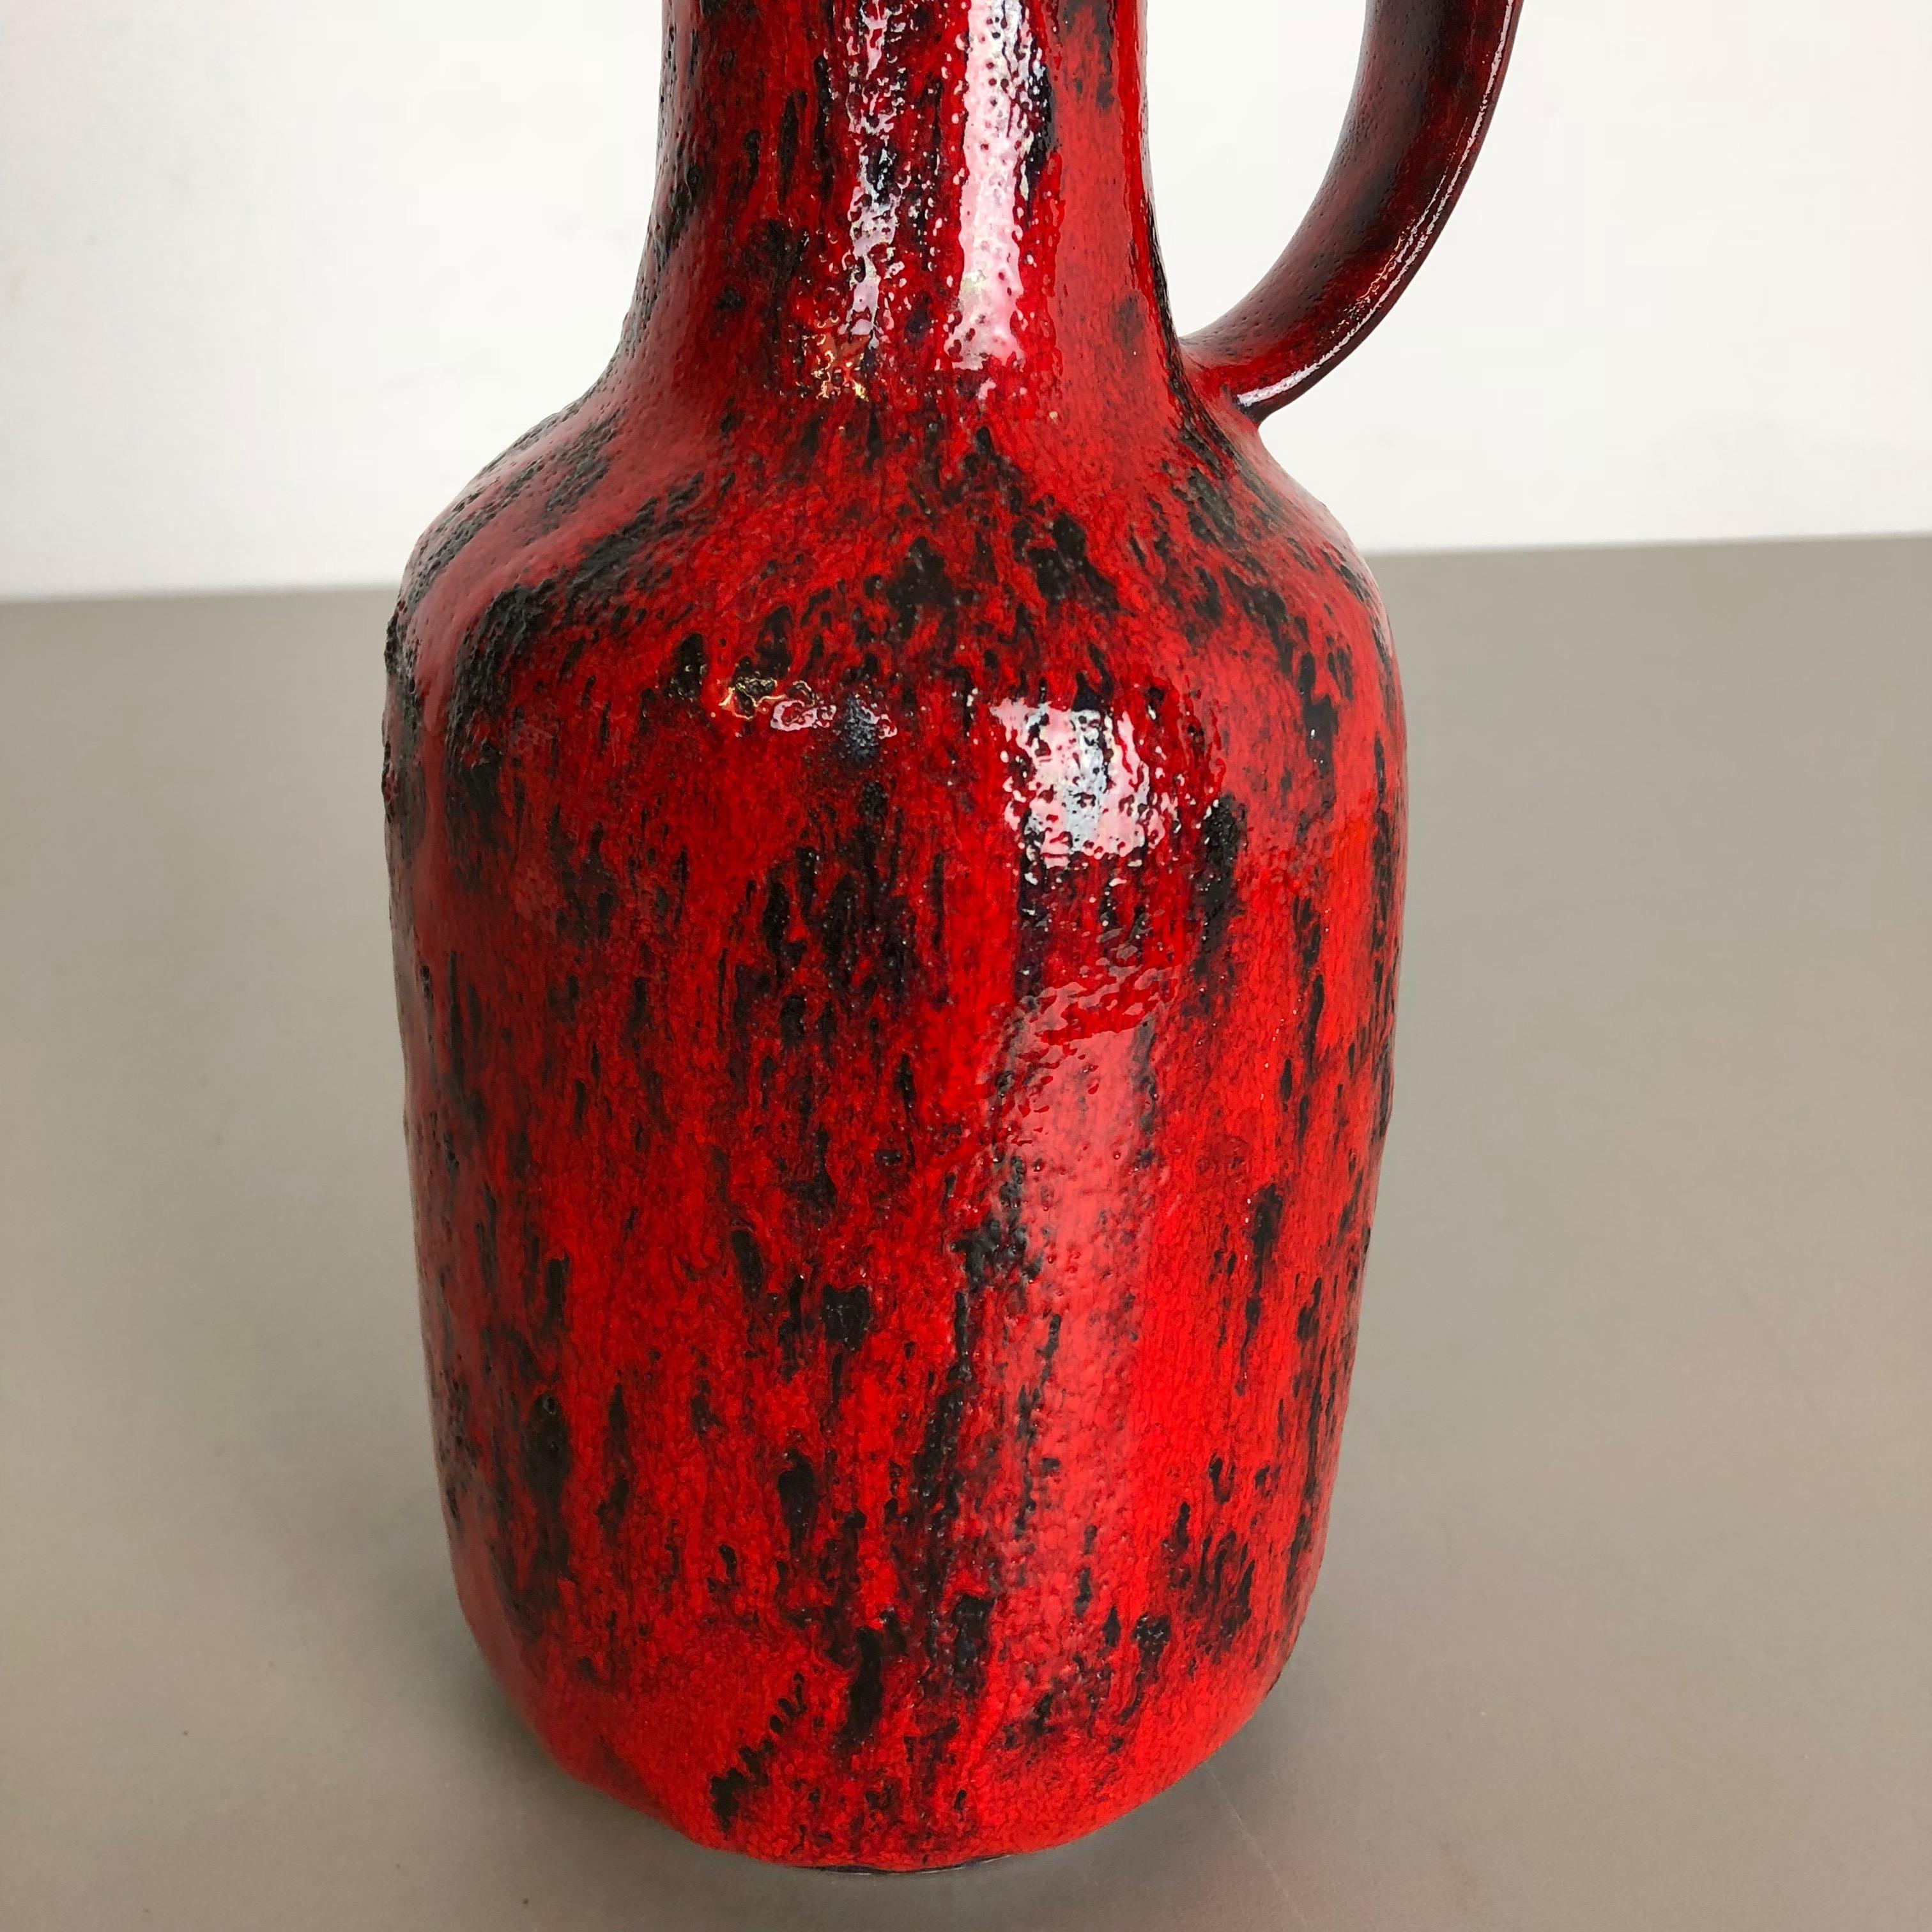 20th Century Super Colorful Fat Lava Pottery Vase by Gräflich Ortenburg, Germany, 1950s For Sale